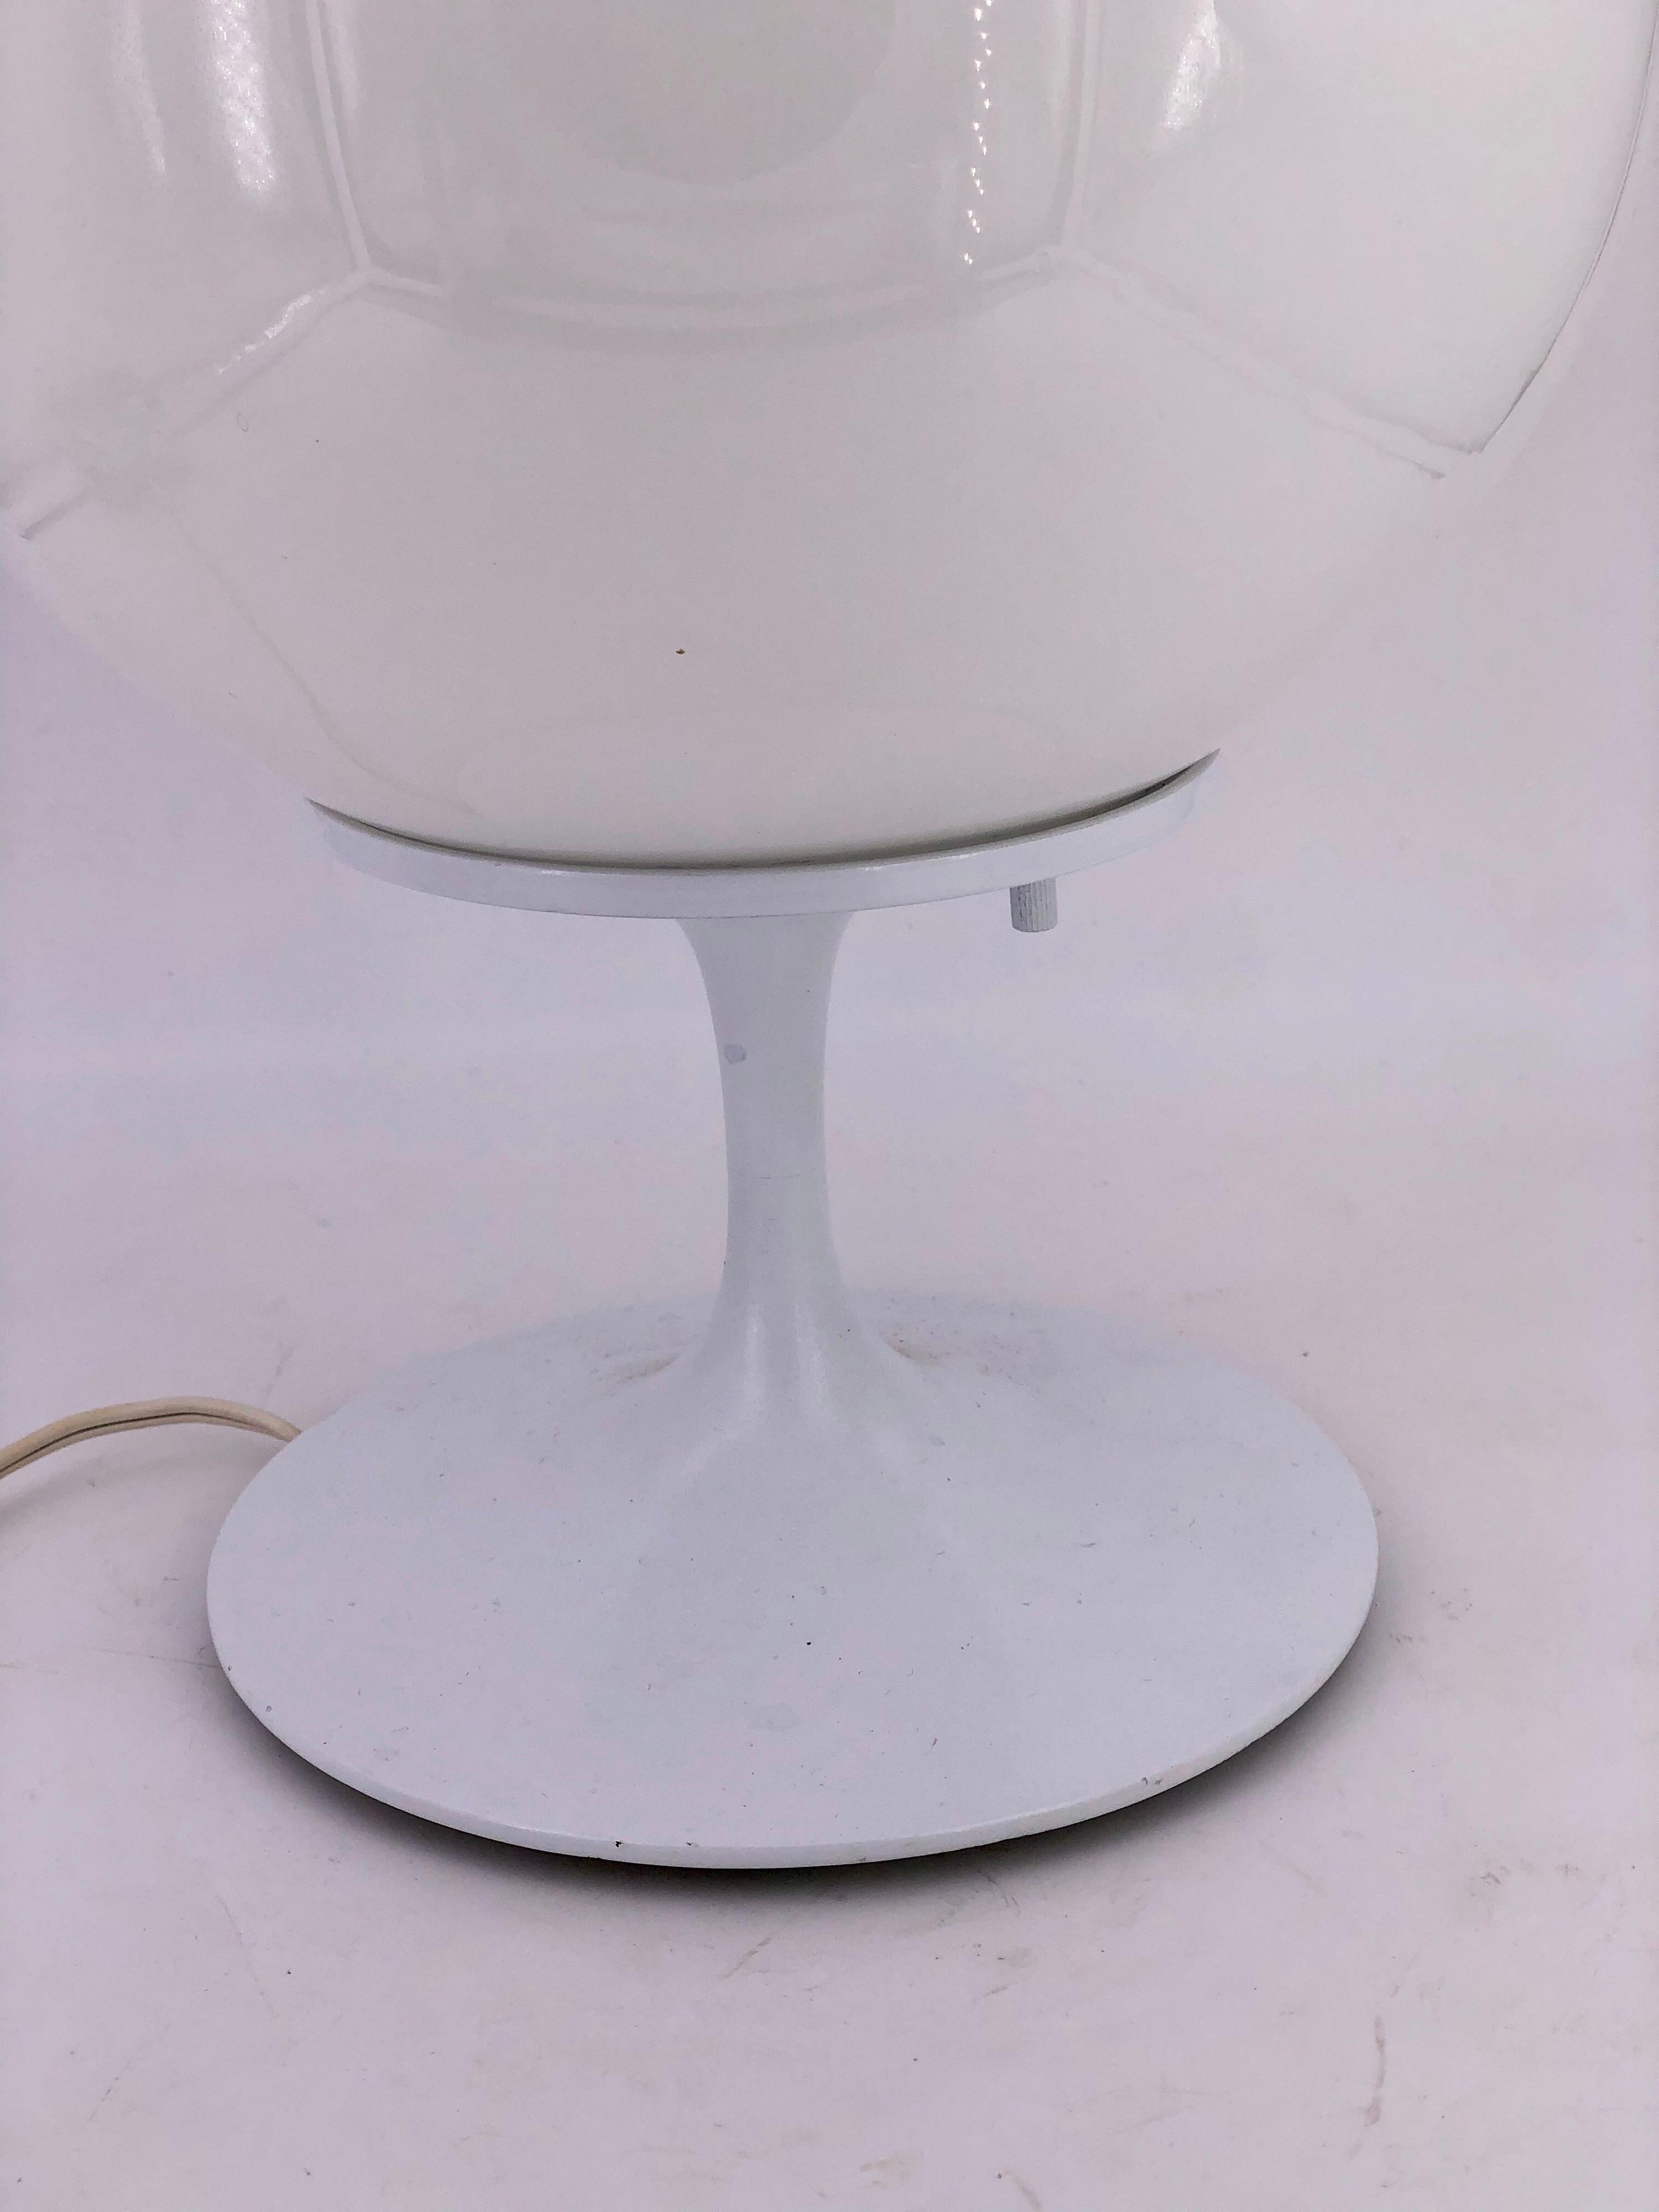 A hard to find floor lamp designed by Bill Curry for Design Line circa 1960s, in great condition and beautiful white enameled base, retains its original label, the base its in great condition overall, nice milk glass in acorn shape. No chips or